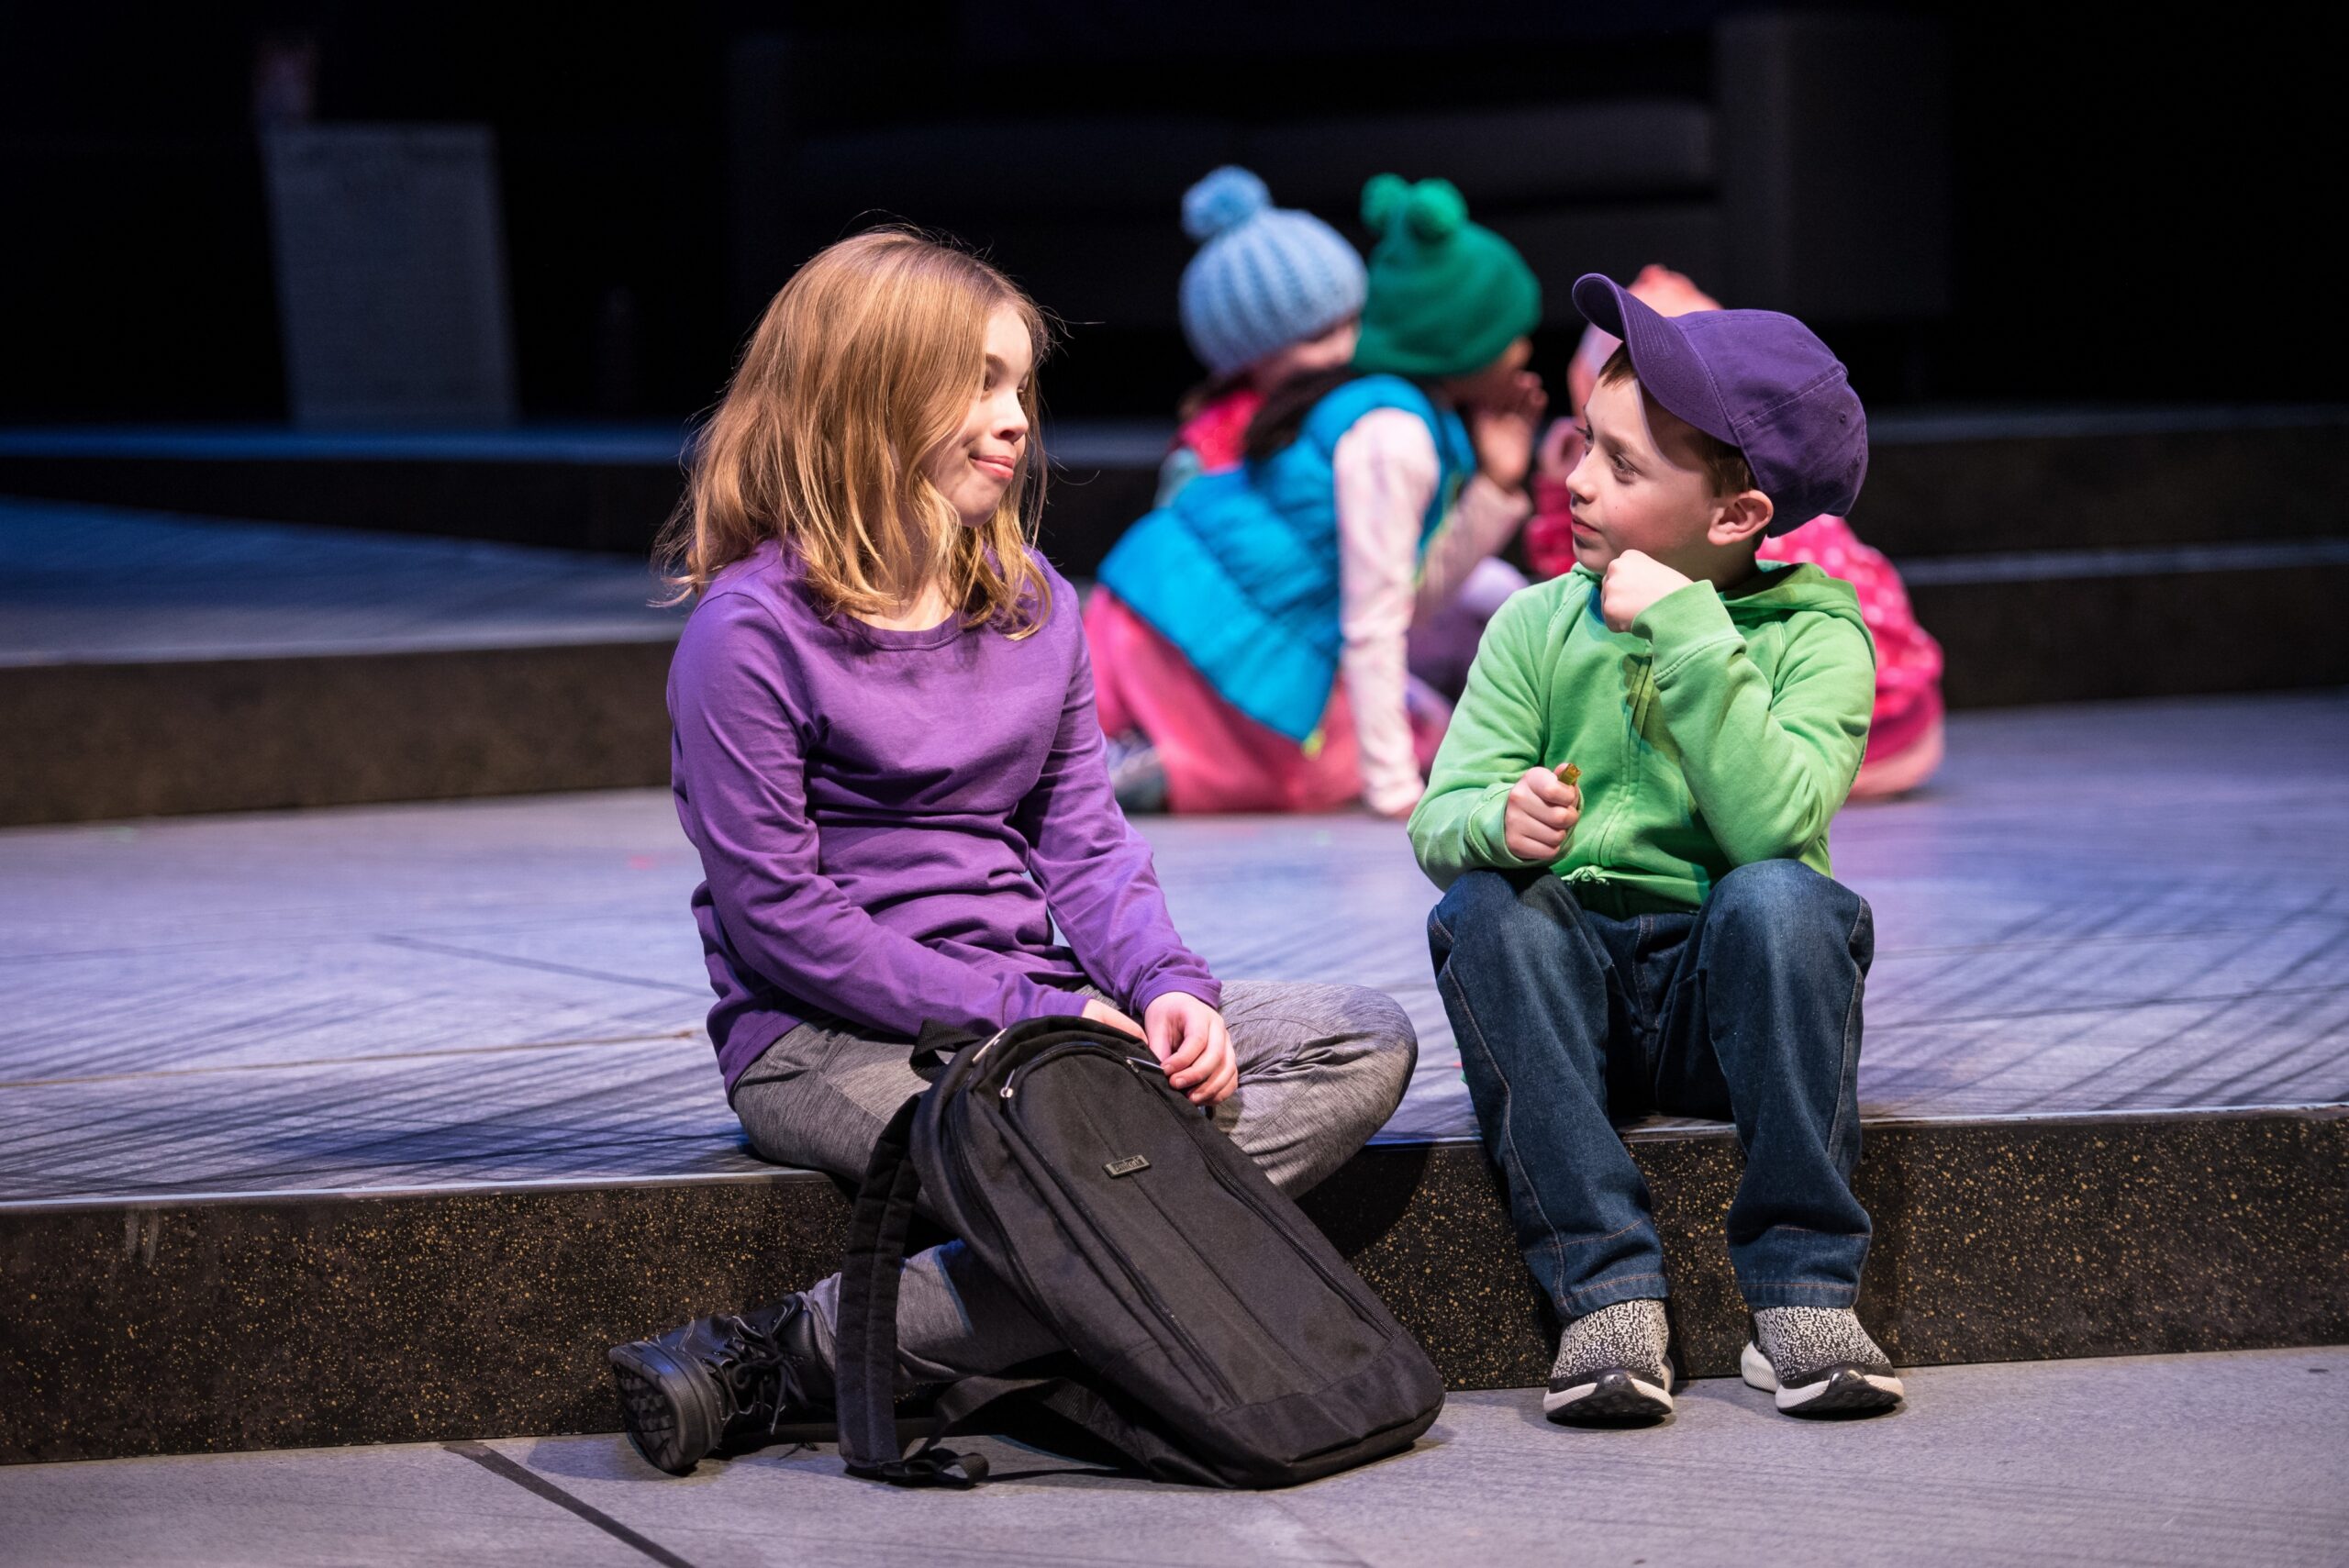 New Theater Production For Young People Brings Autism Into Focus